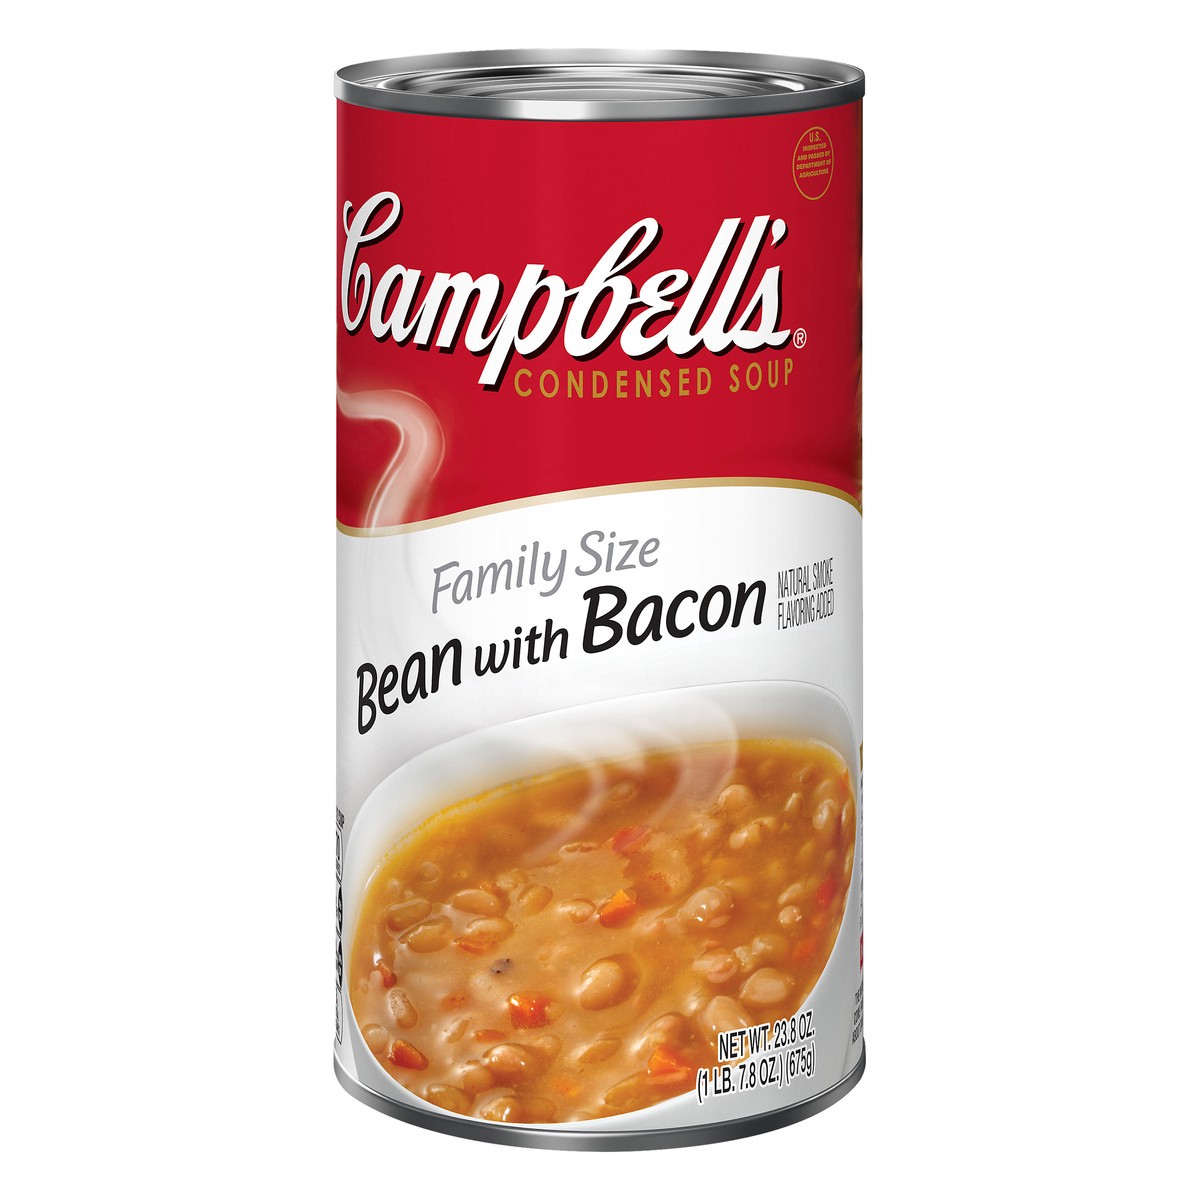 slide 11 of 13, Campbell's Family Size Bean with Bacon Condensed Soup 23.8 oz, 23.8 oz